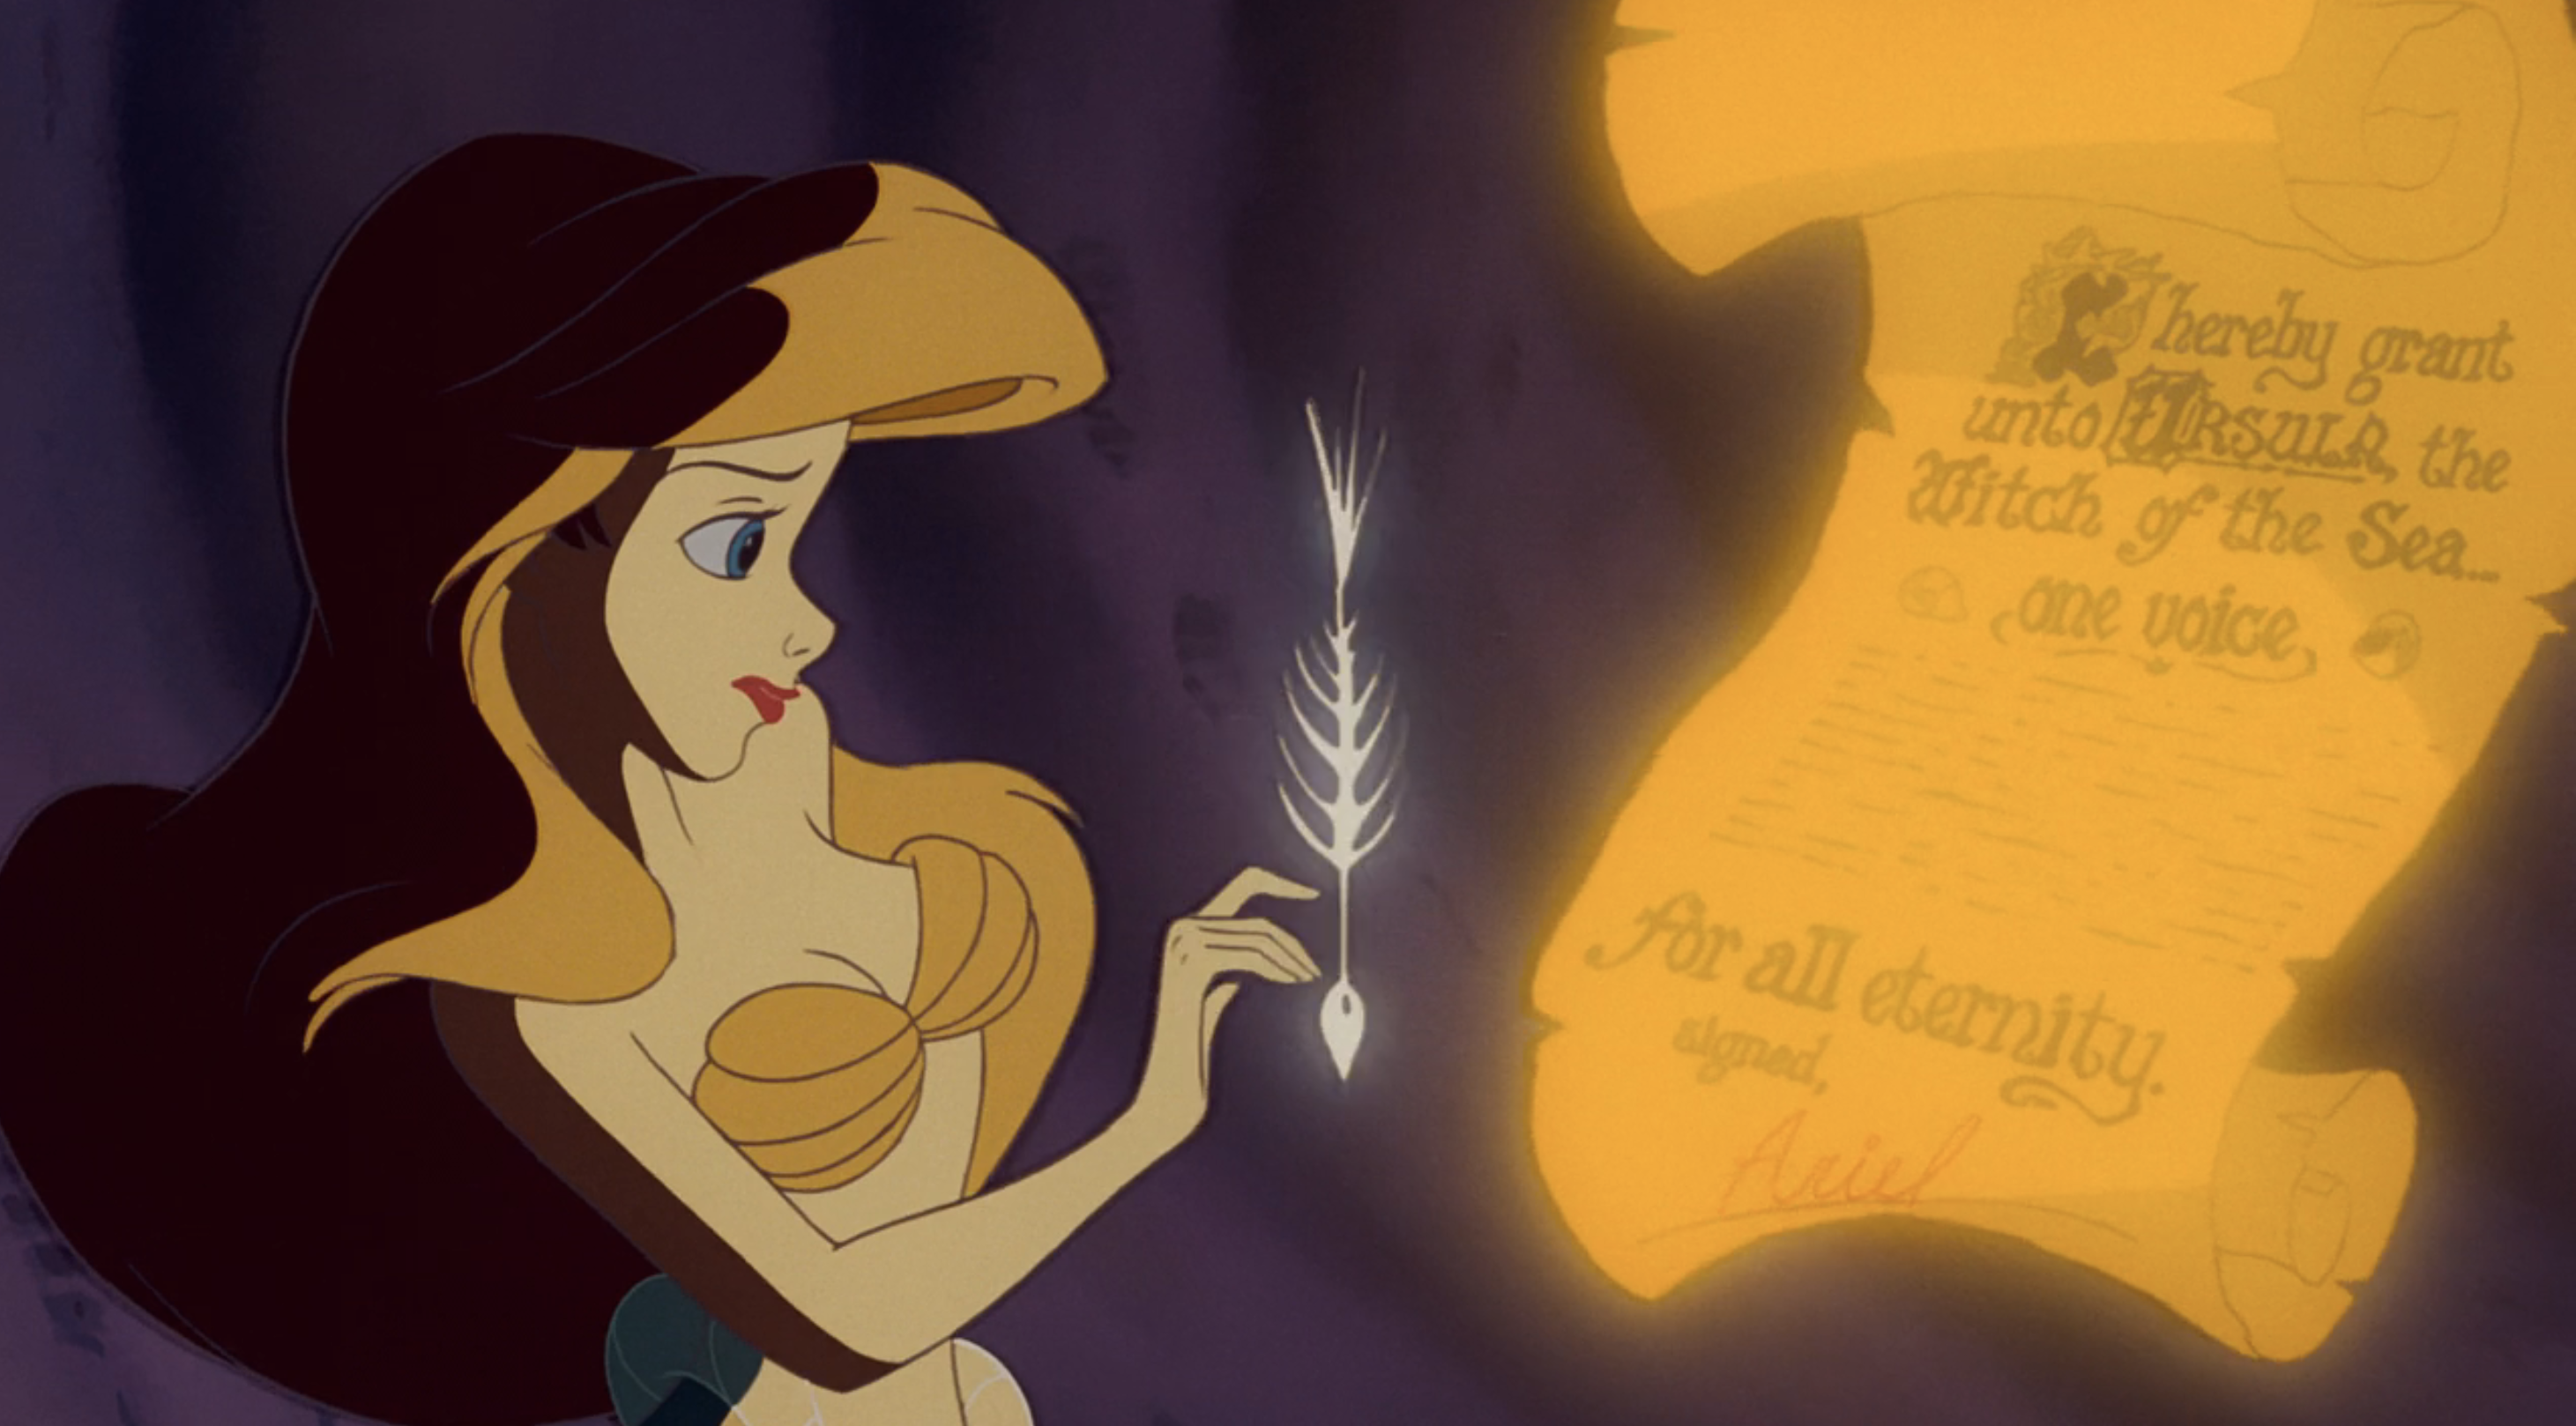 Ariel from The Little Mermaid holds a quill, contemplating a contract from Ursula